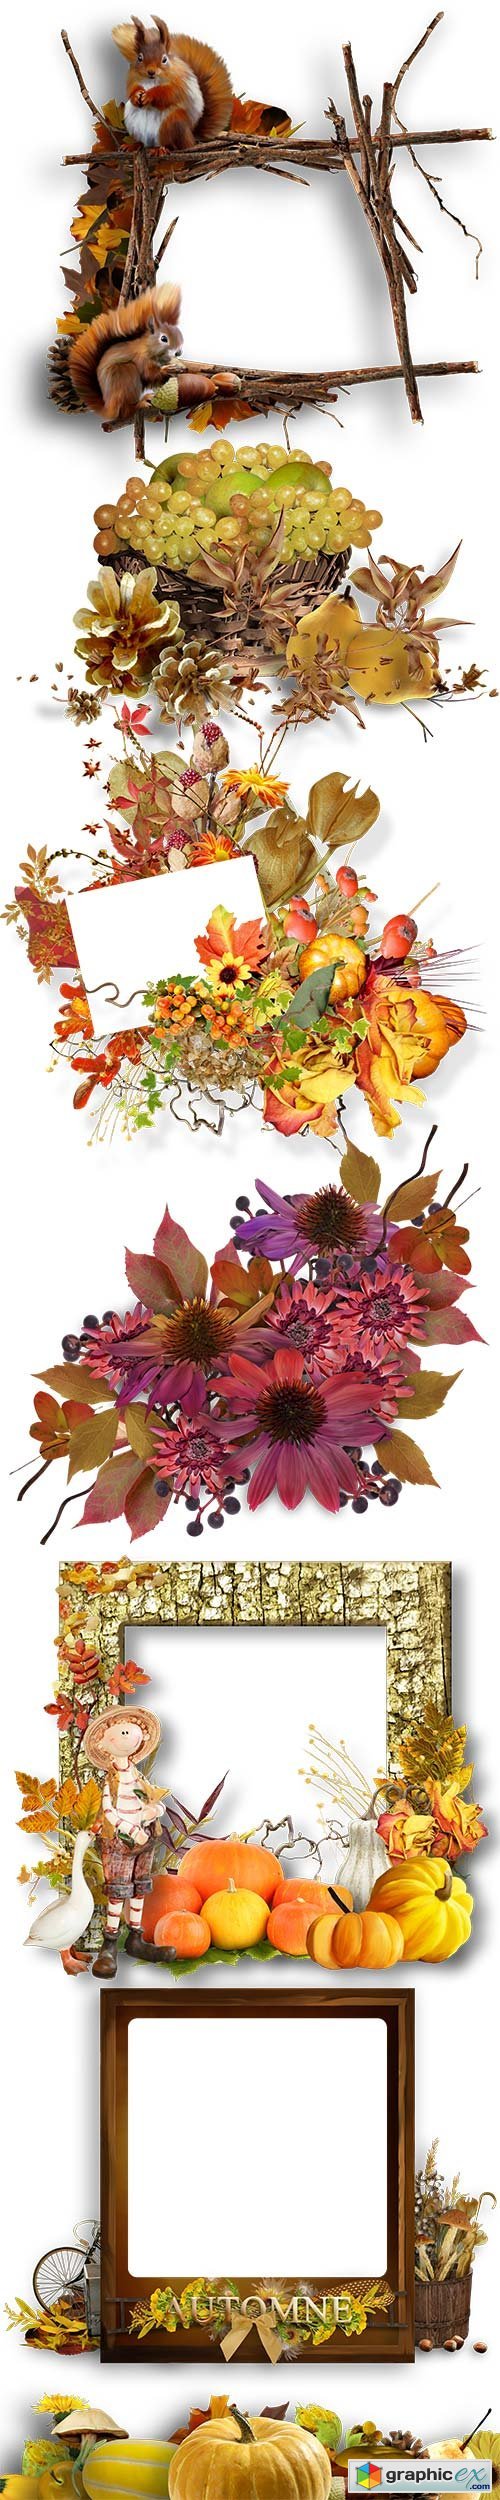 Autumn clipart and frames